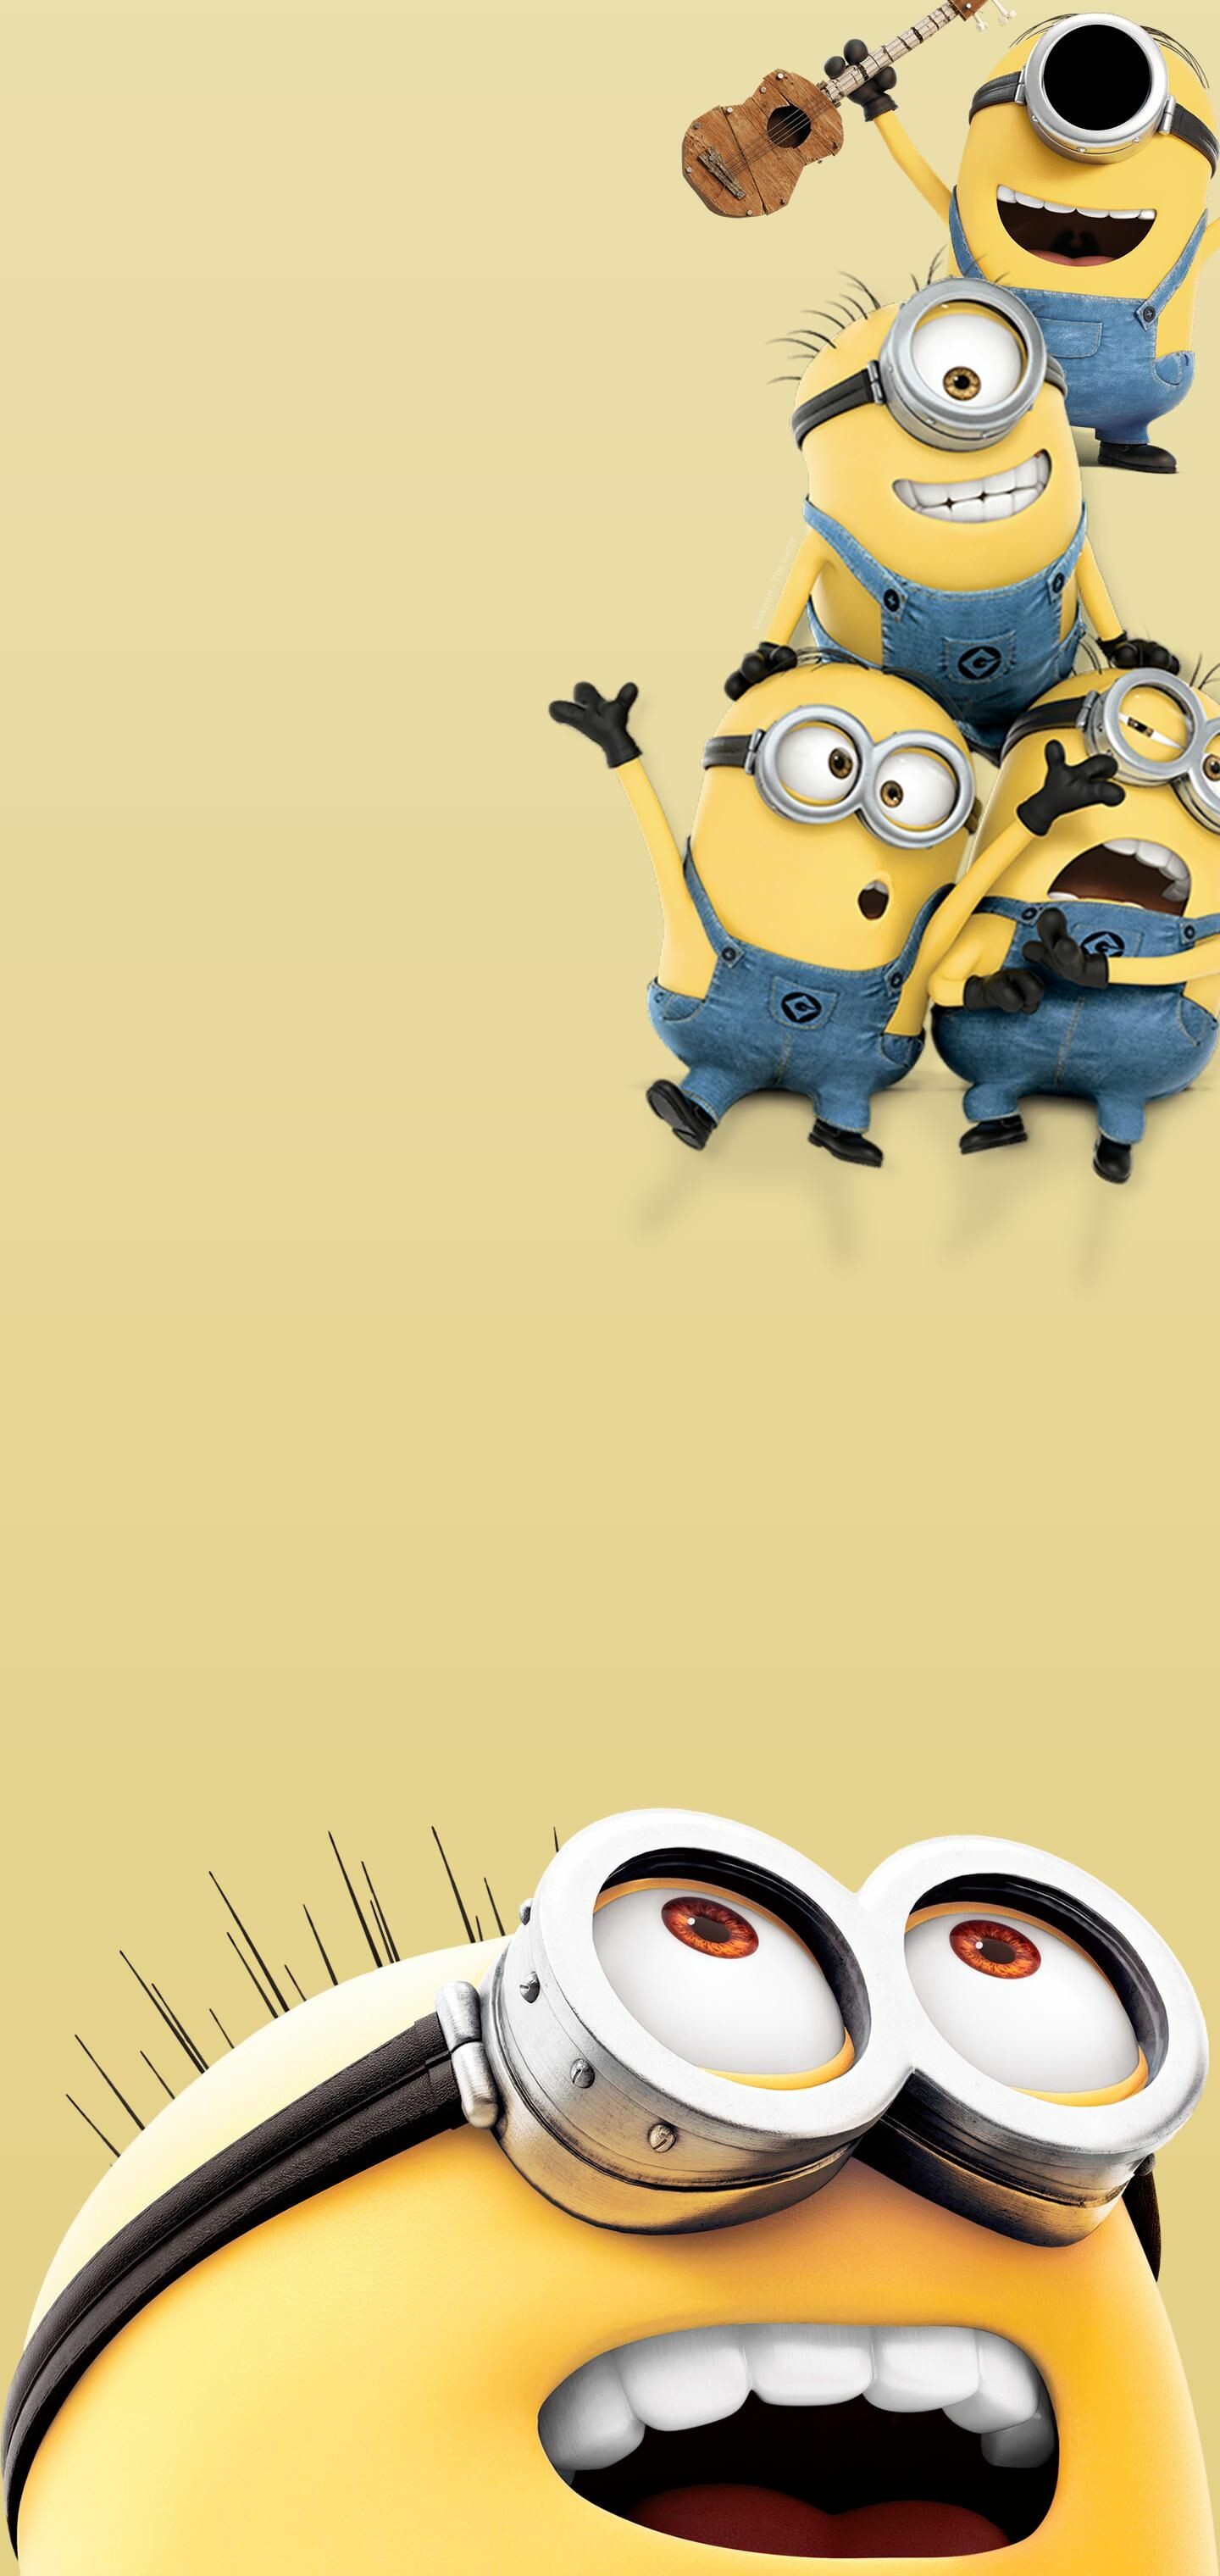 Despicable Me: Minions, speak in an incomprehensible language, called Minionese. 1440x3040 HD Wallpaper.